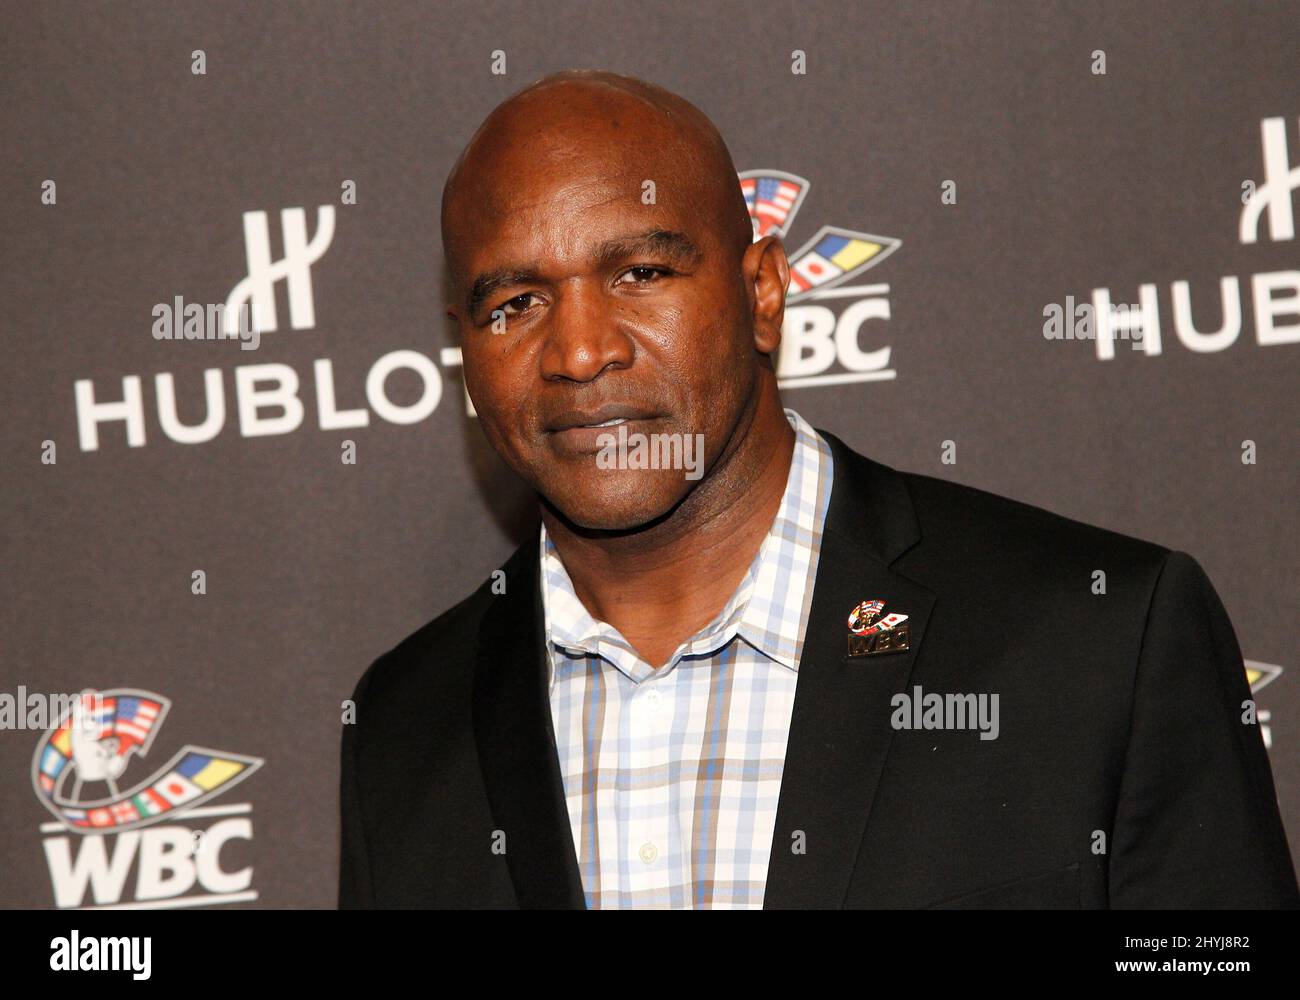 Evander Holyfield arriving at the Hublot Night of Champions Gala Dinner to Support WBC Jose Sulaiman Boxers Fund, Encore Hotel Las Vegas, USA Stock Photo